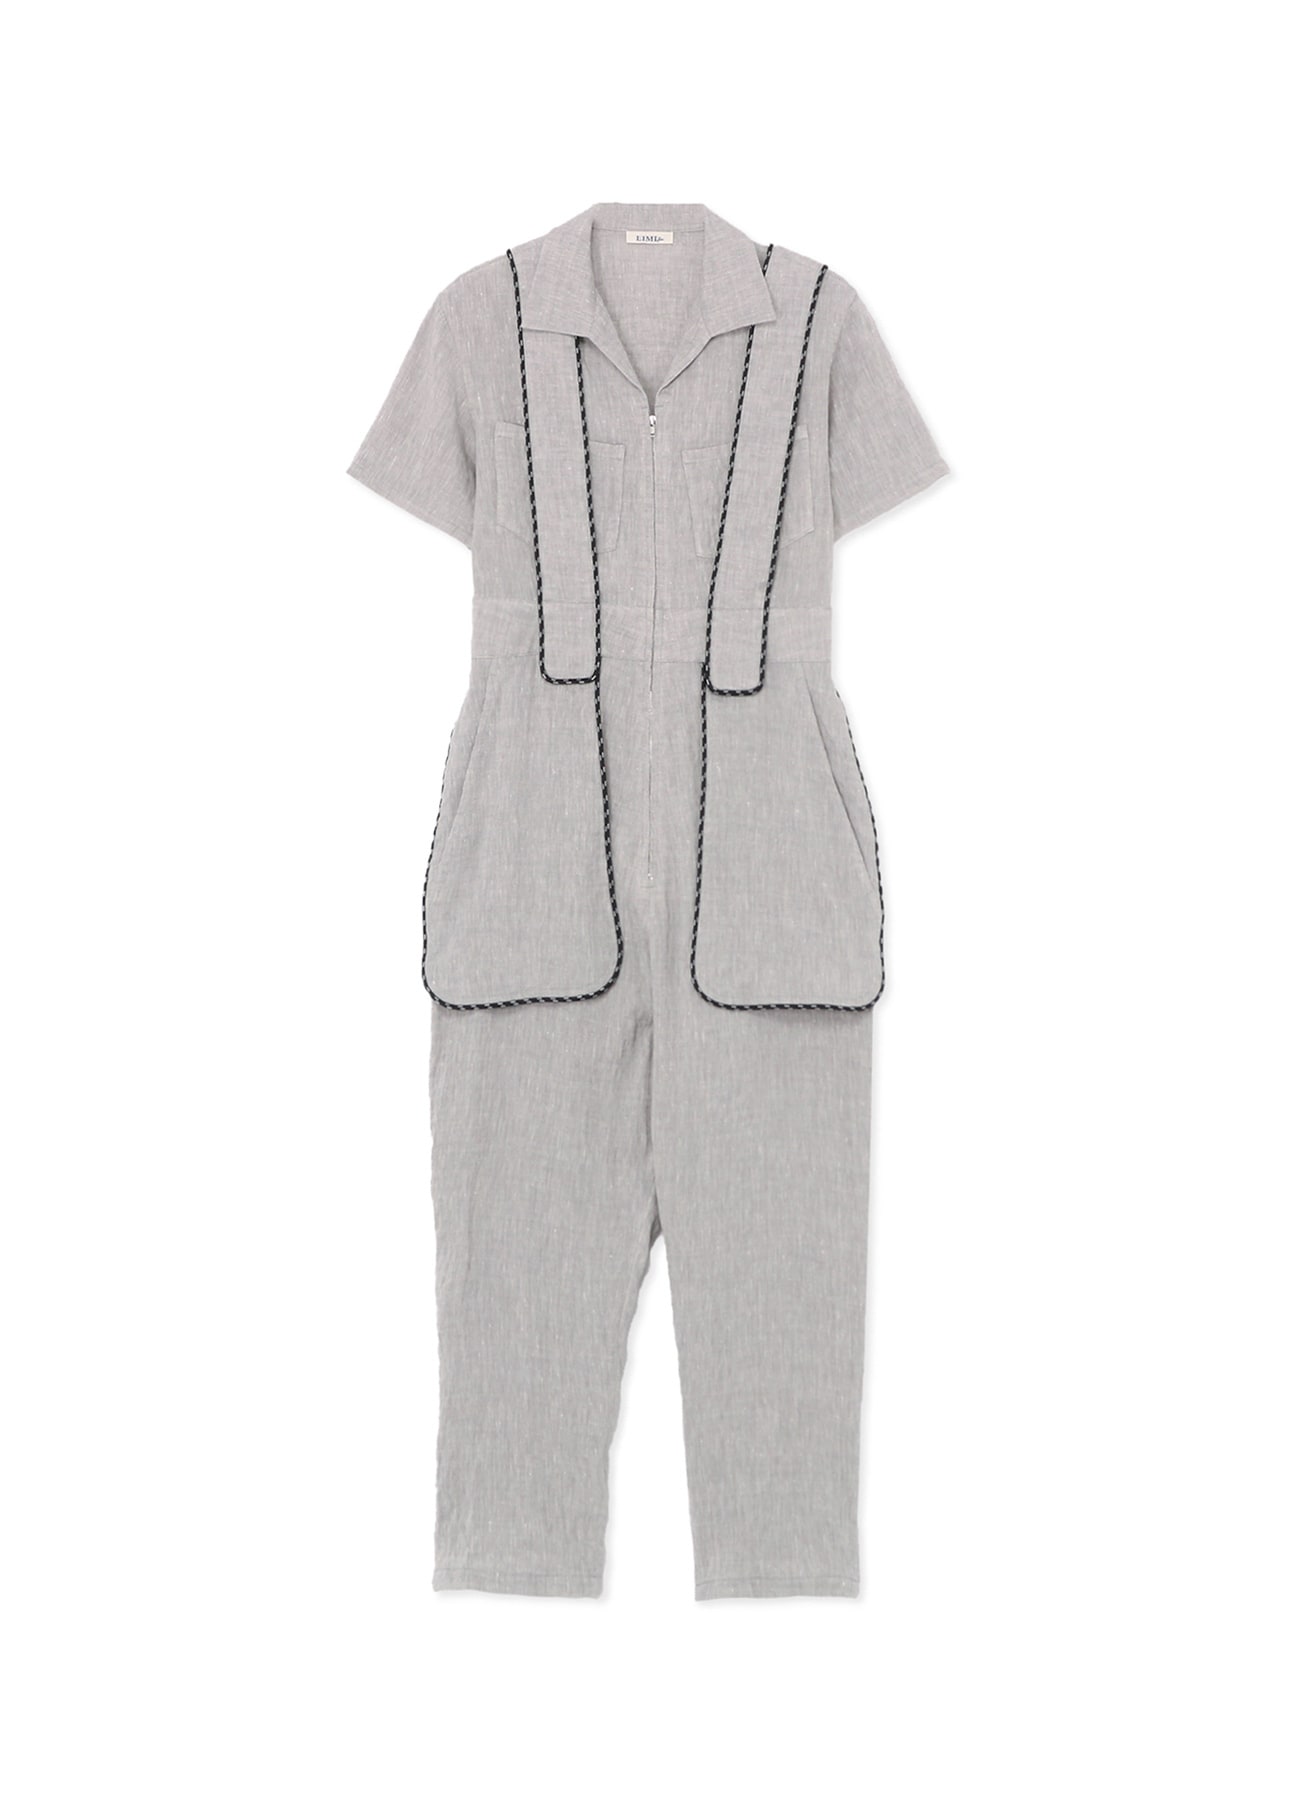 BREATHABLE LINEN/RAYON JUMPSUIT WITH MULTIPLE POCKETS